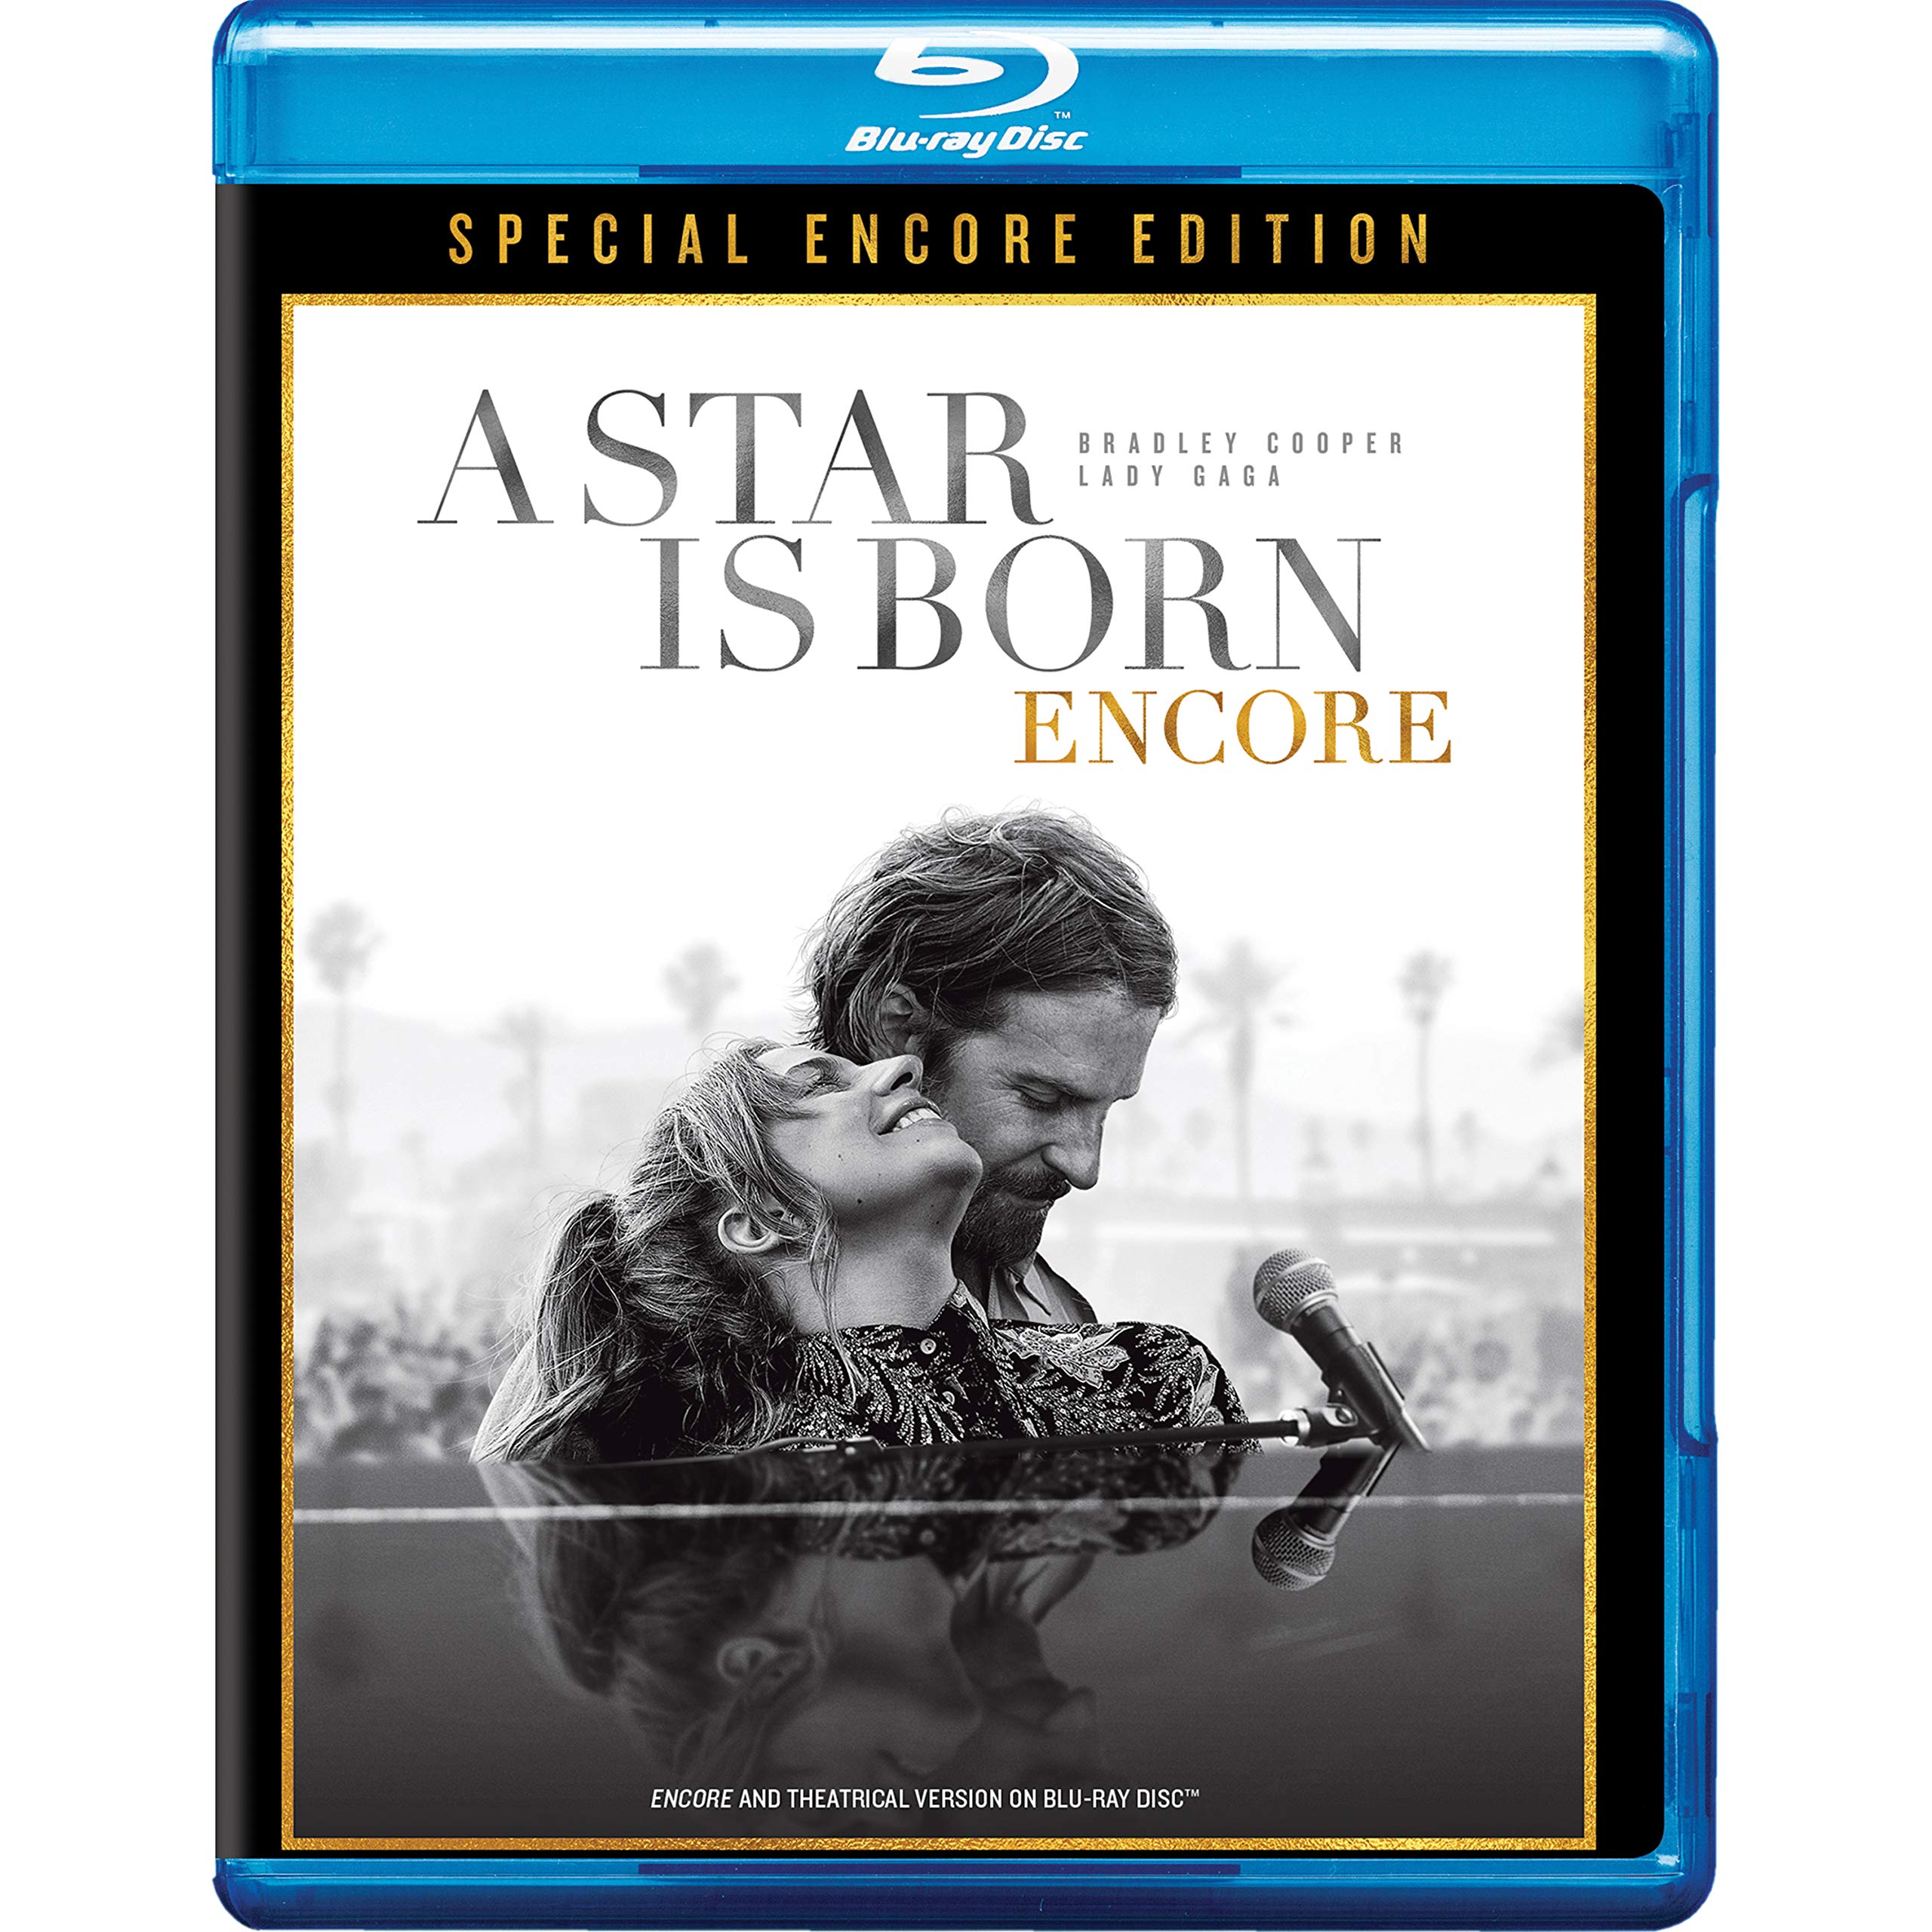 a-star-is-born-encore-edition-movie-purchase-or-watch-online